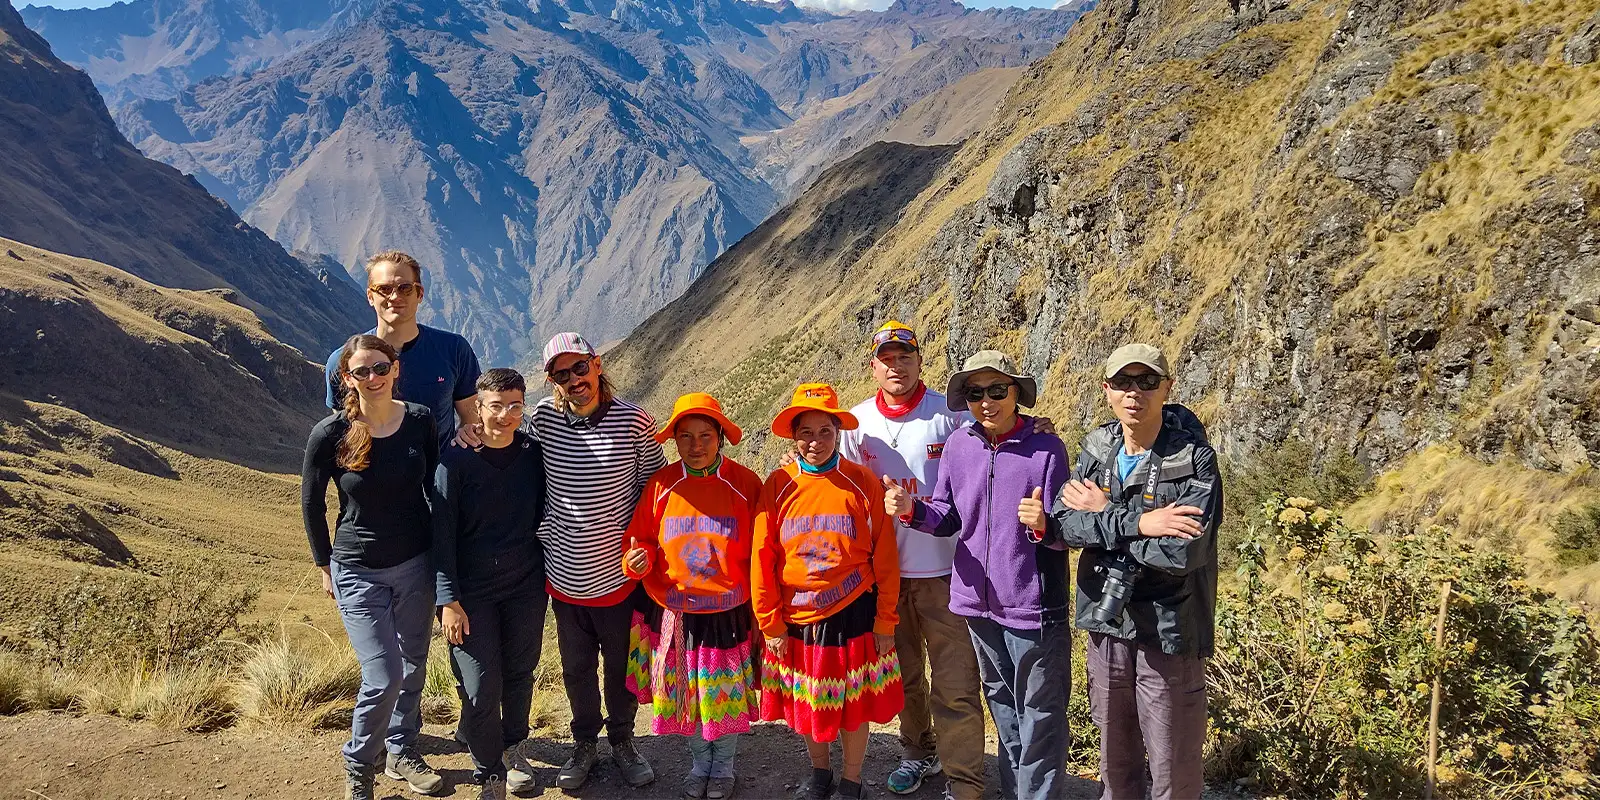 Empowering Women on the Inca Trail